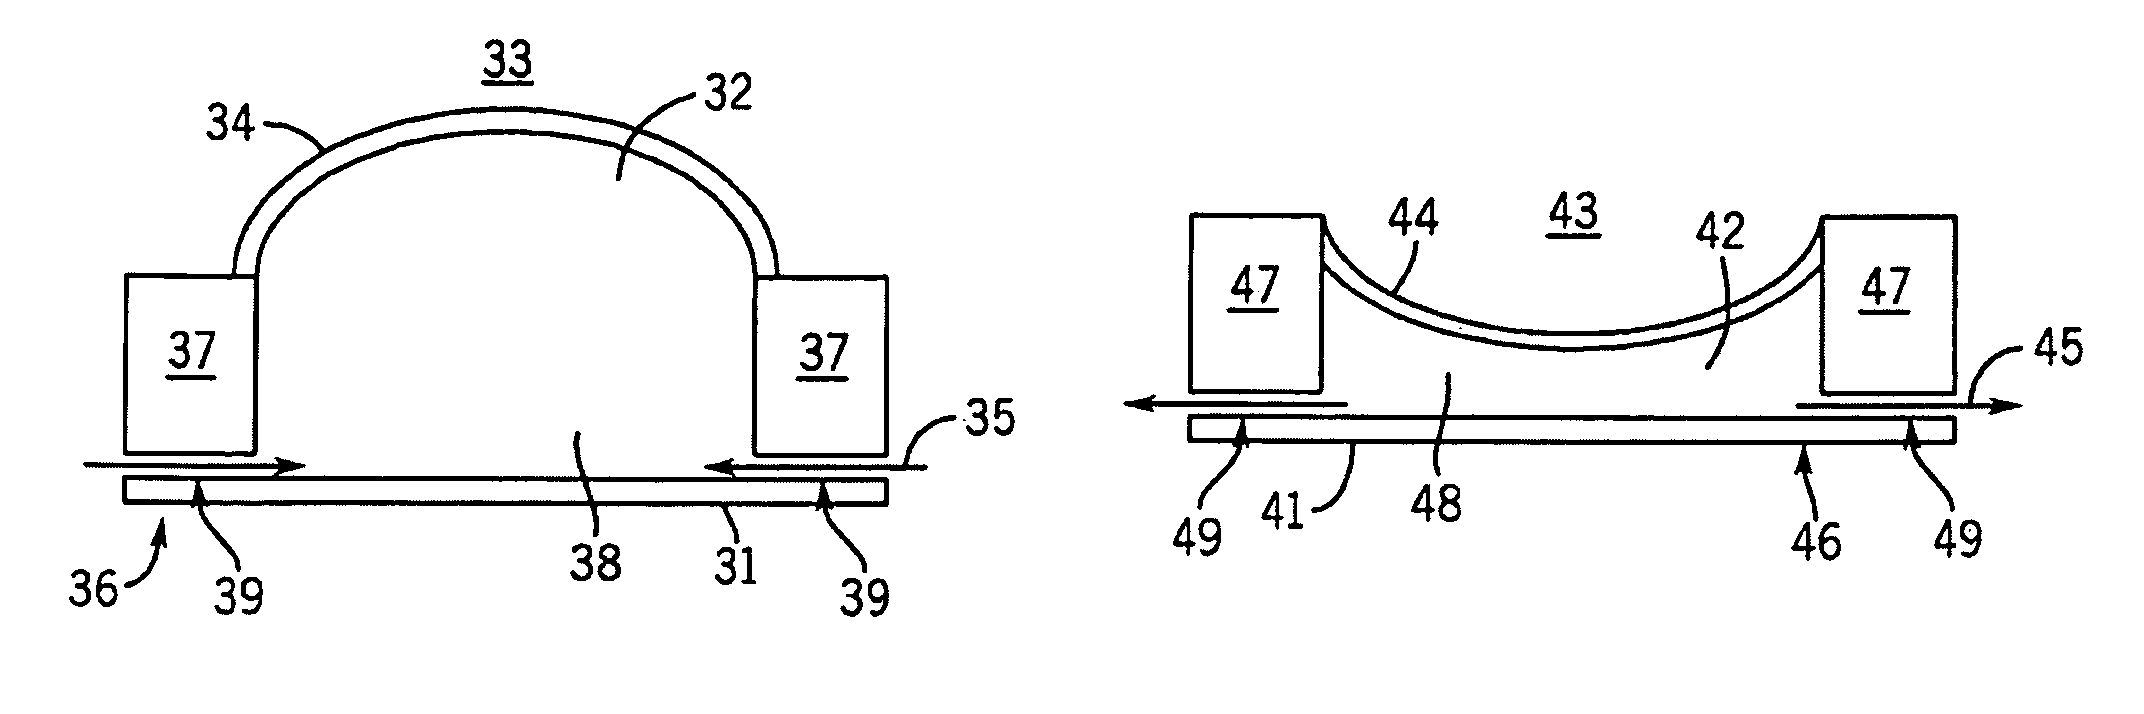 Fluidic adaptive lens systems and methods